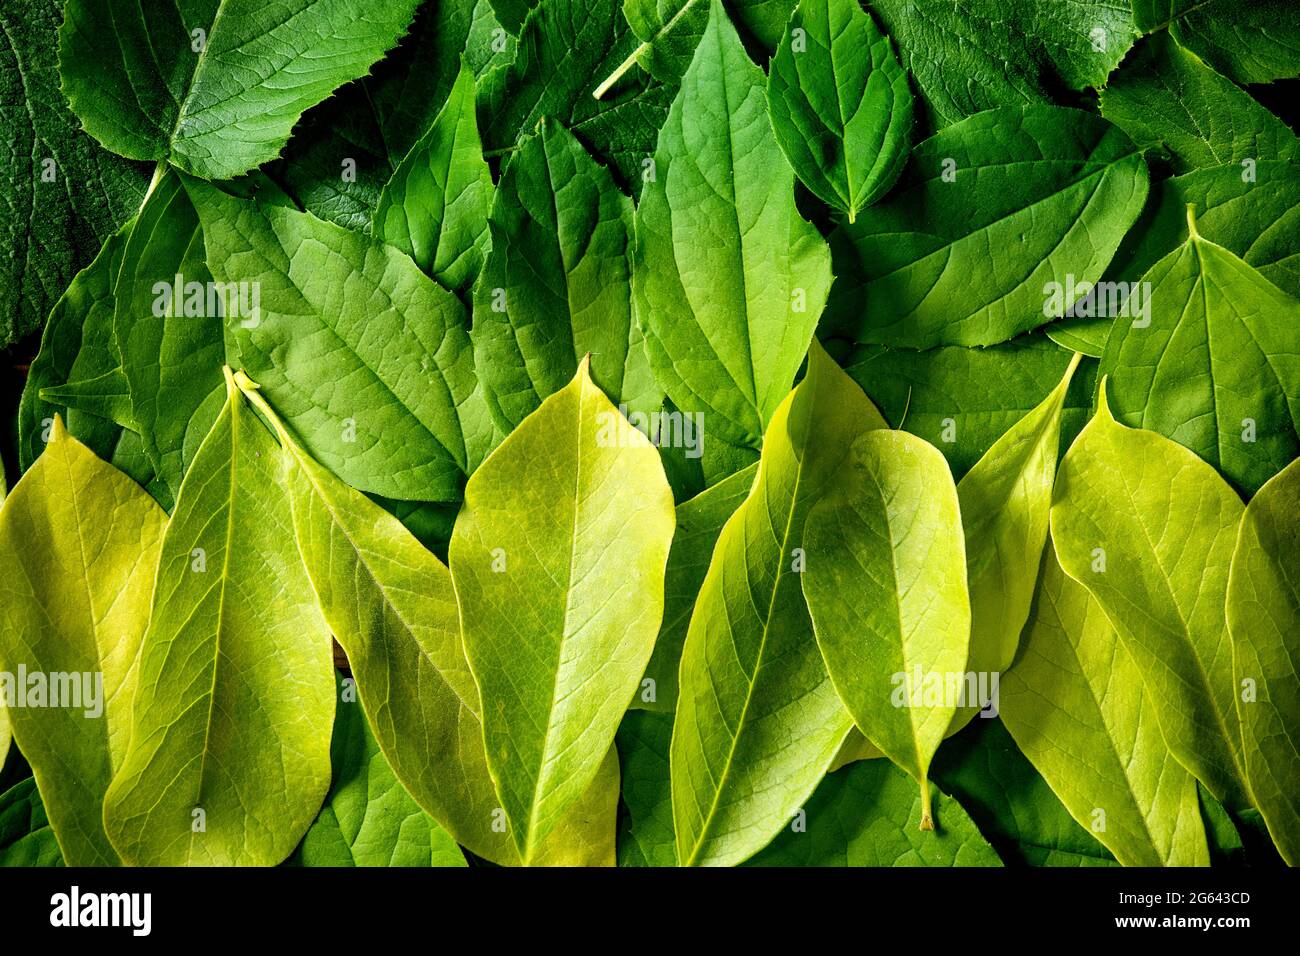 Background made of different layered green leaves, green yellow gradient. Copy space. Nature creative layout, Top view, flat lay. Green life concept. Stock Photo